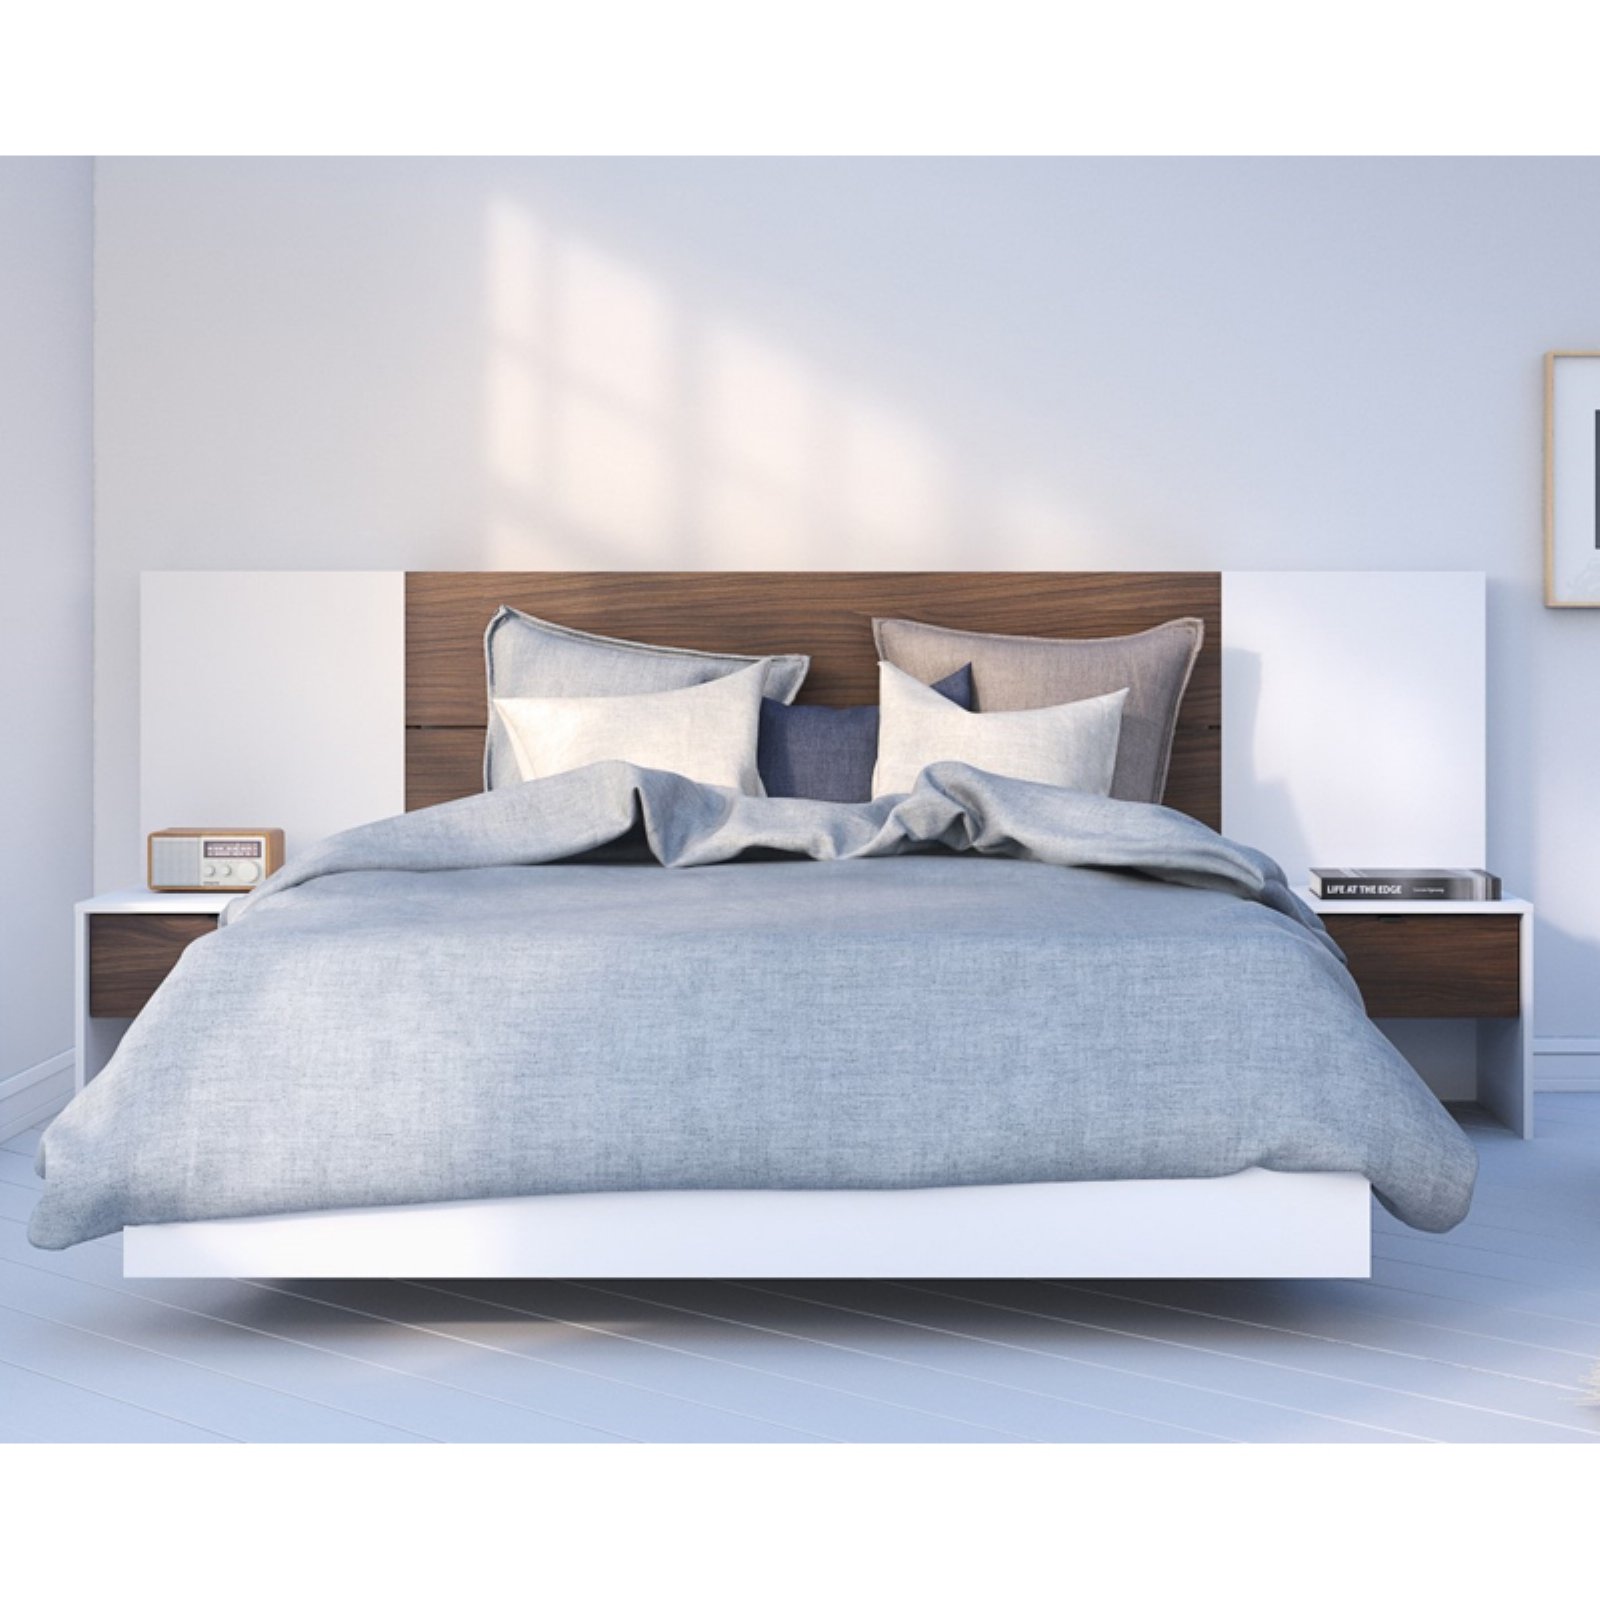 Nexera Celebri-T Plank Effect Platform Bed with Headboard Extension Panels and 2 Nightstands - image 1 of 5